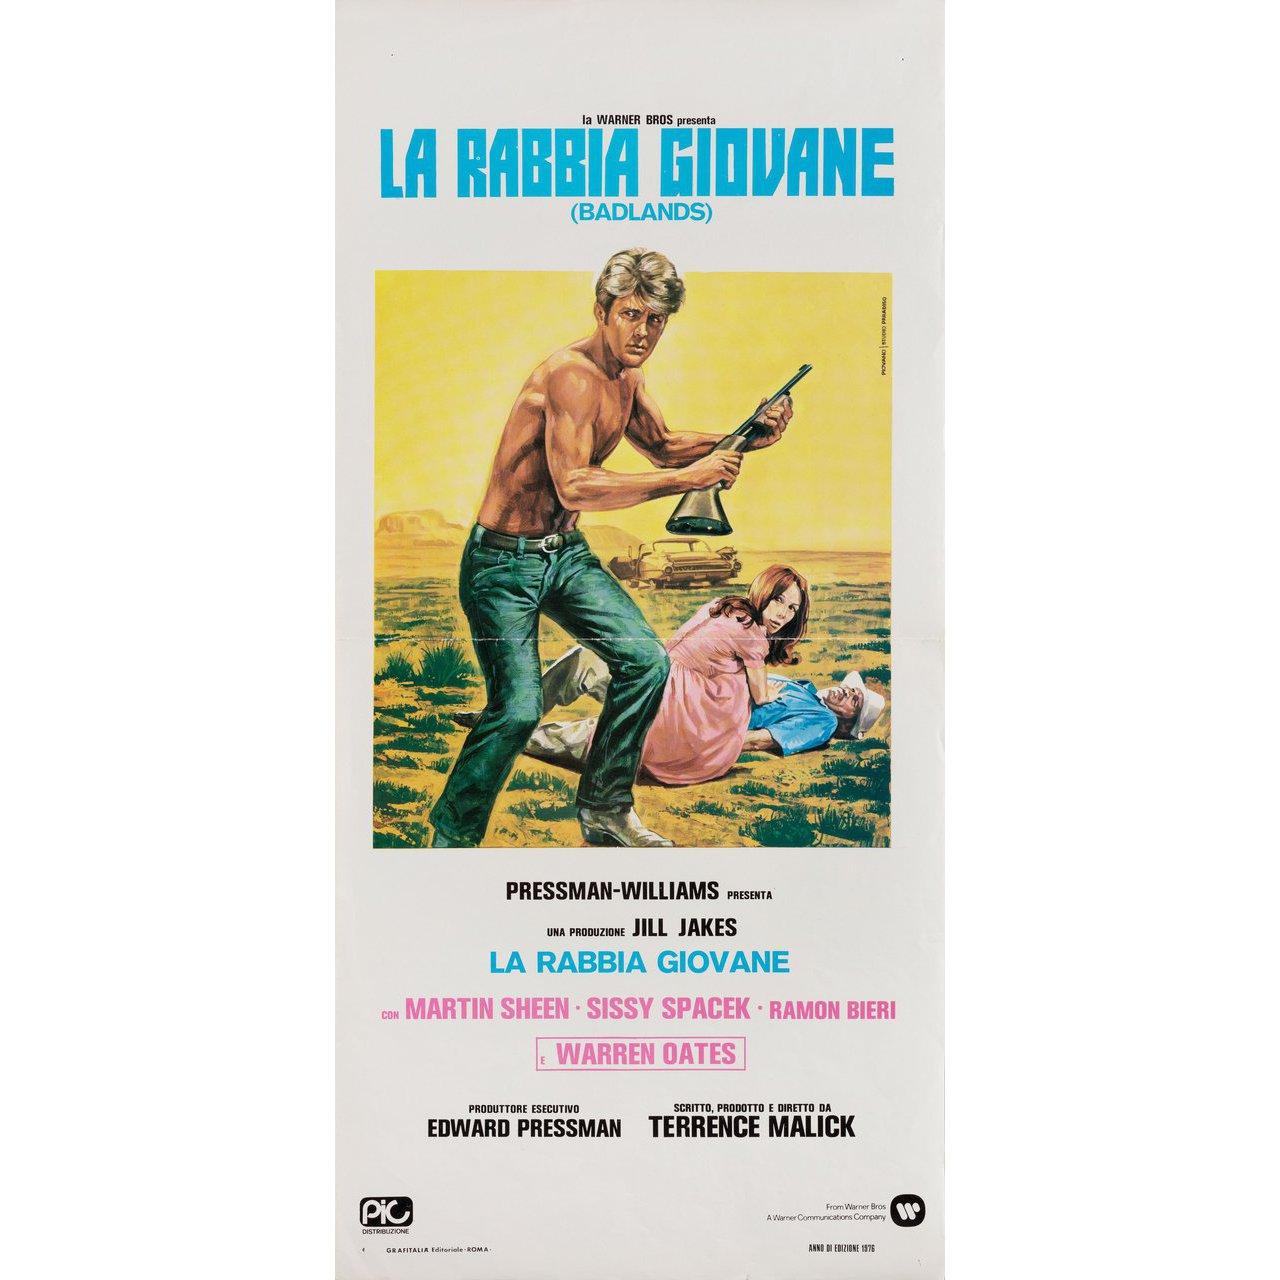 Original 1976 Italian locandina poster by Mario Piovano for the first Italian theatrical release of the 1973 film Badlands directed by Terrence Malick with Martin Sheen / Sissy Spacek / Warren Oates / Ramon Bieri. Very Good condition, folded w/